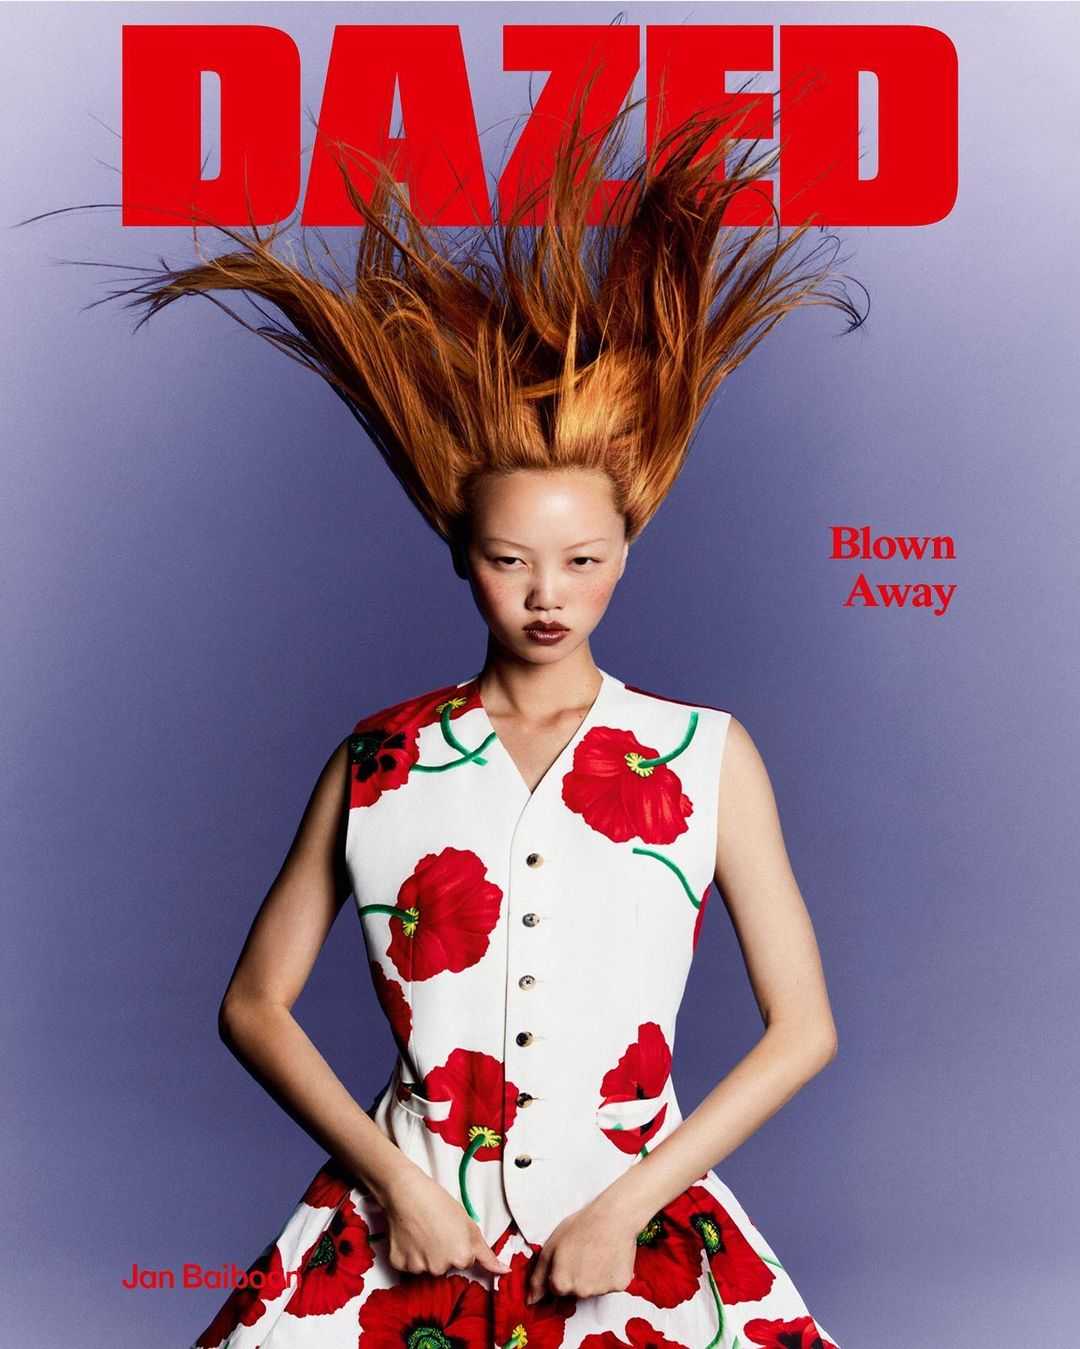 Dazed - The Age of Imagination Issue - 4465